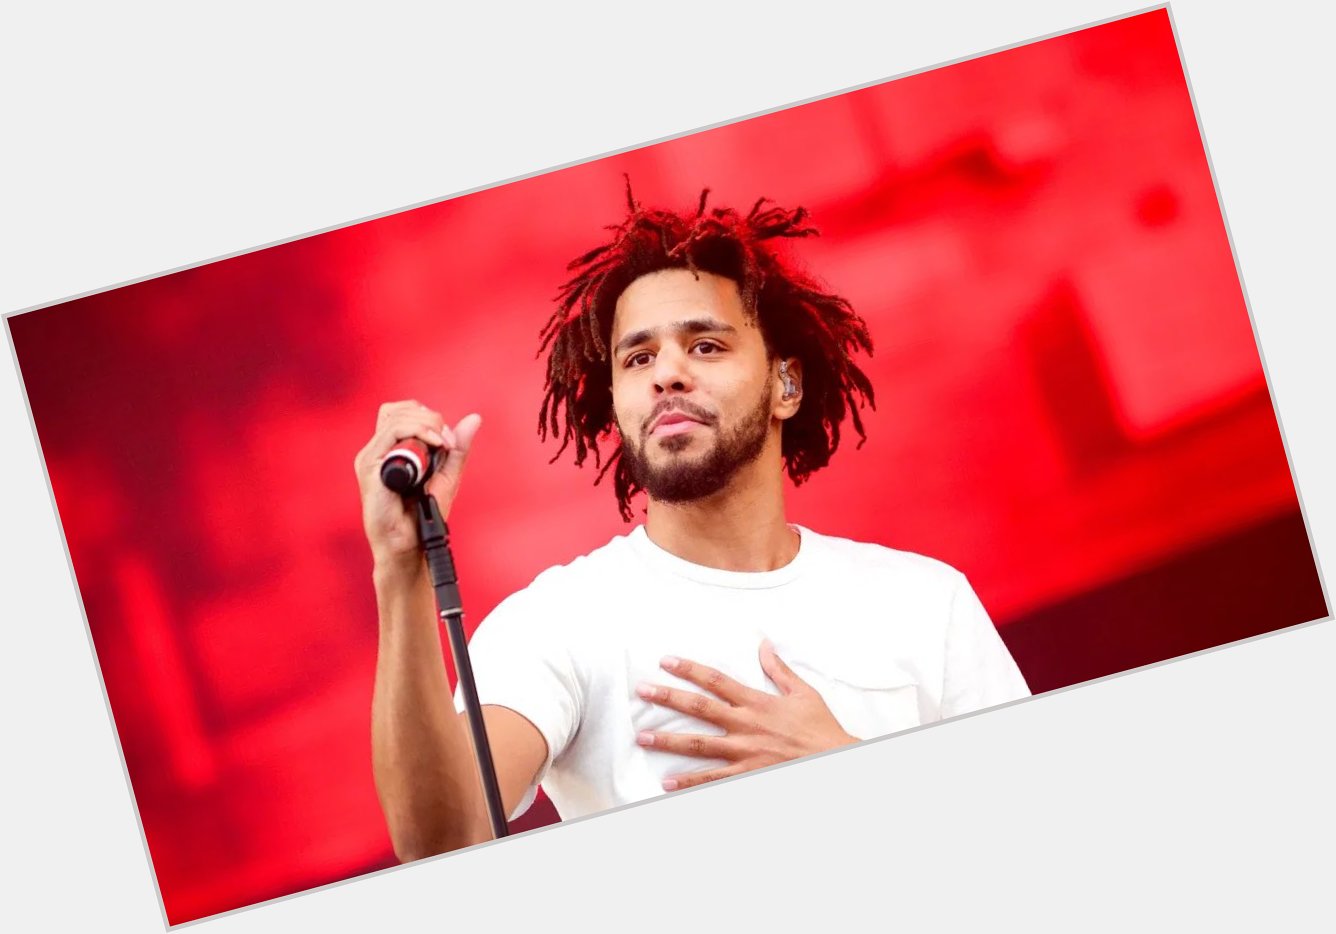 Happy birthday J. Cole Today he turns 36 years old 